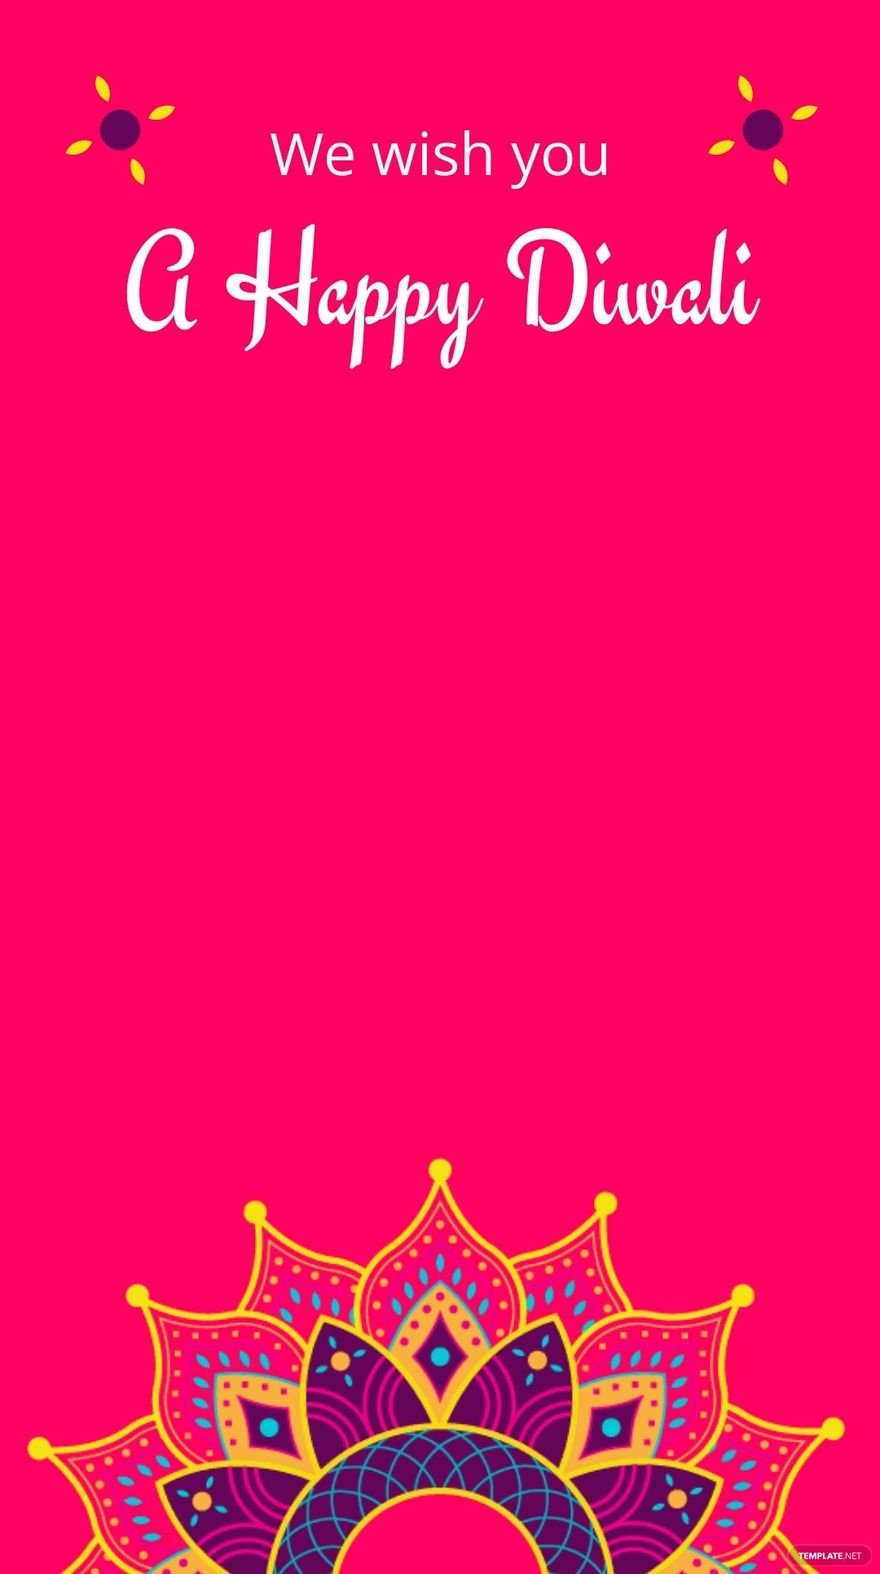 Colorful Diwali Wishes Snapchat Geofilter